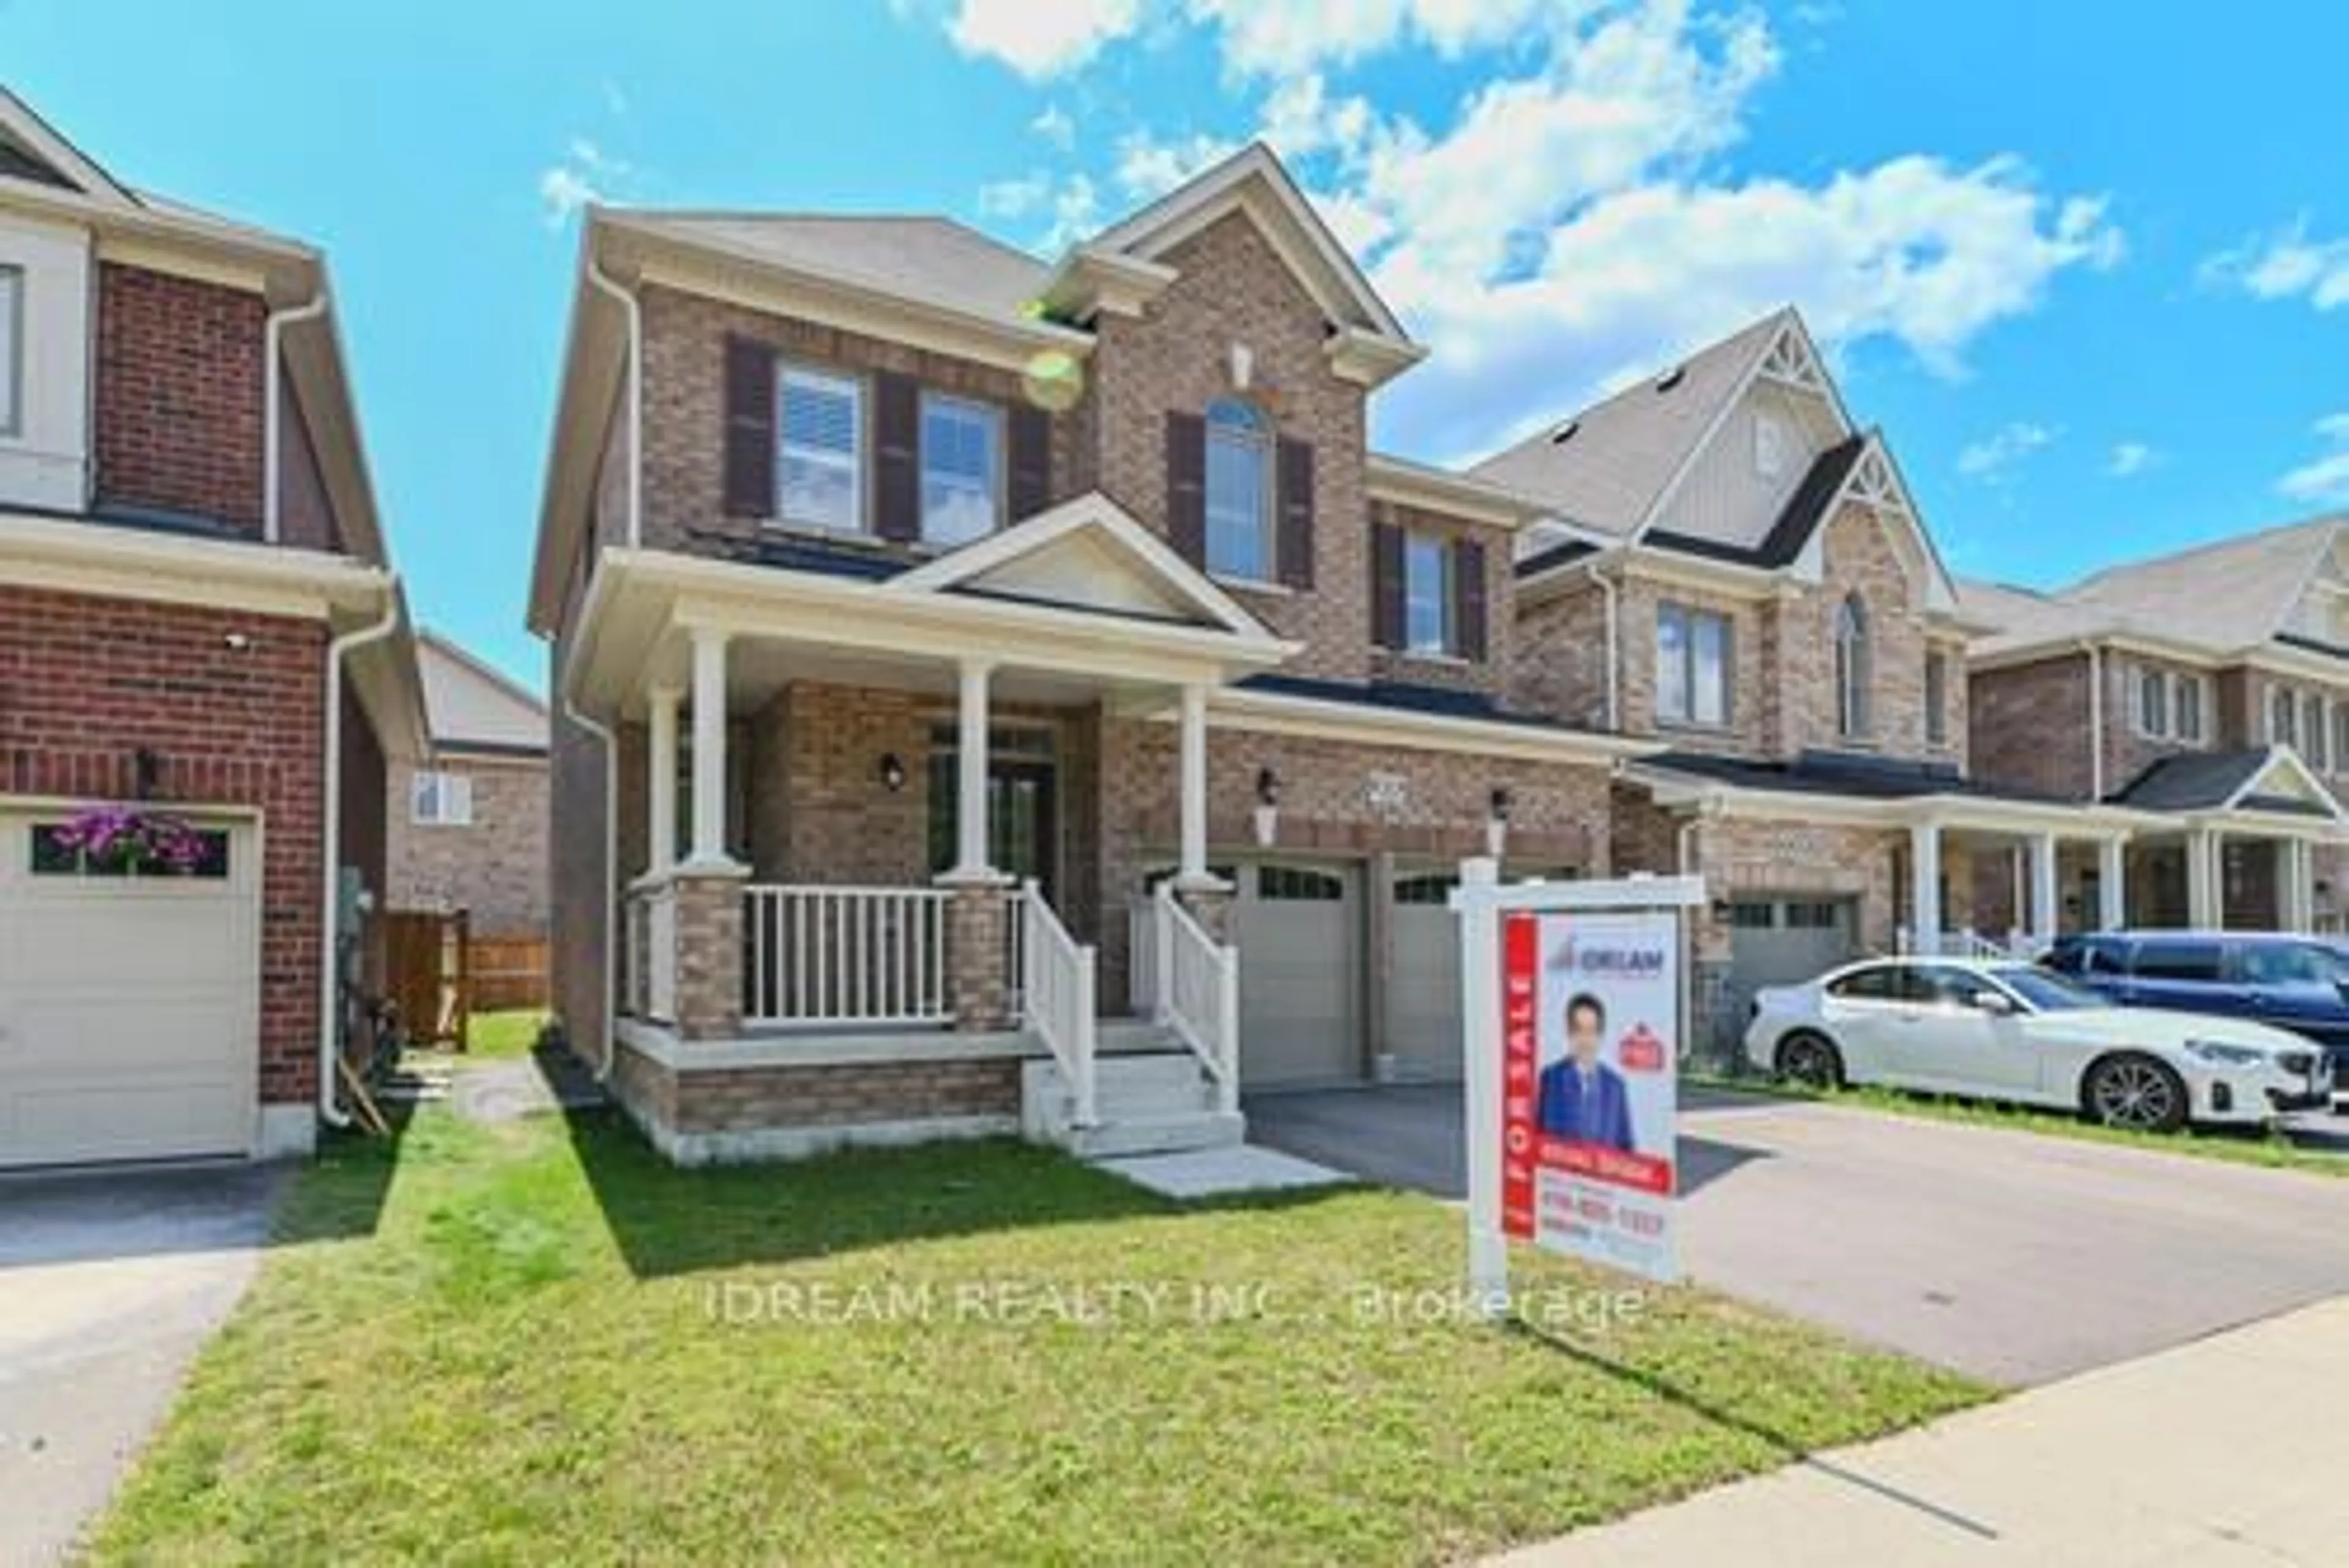 Home with brick exterior material for 41 Ronald Hooper Ave, Clarington Ontario L1C 7G8